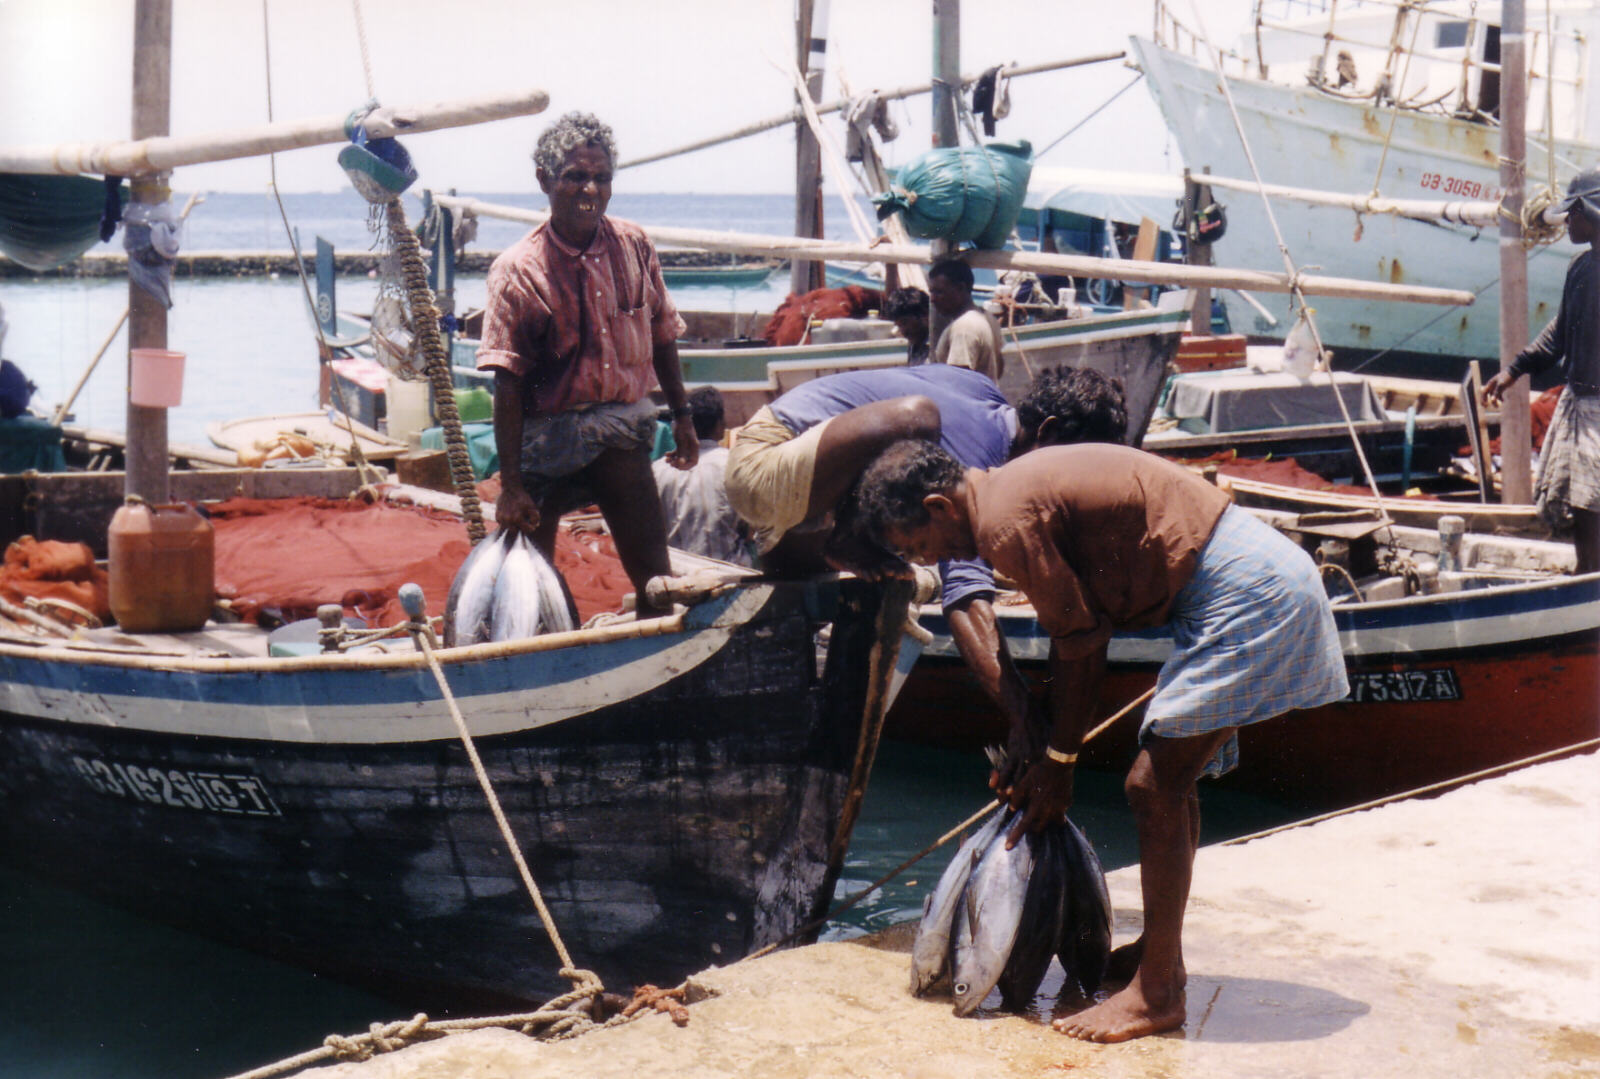 Unloading fish in the harbour in Mal, Maldives